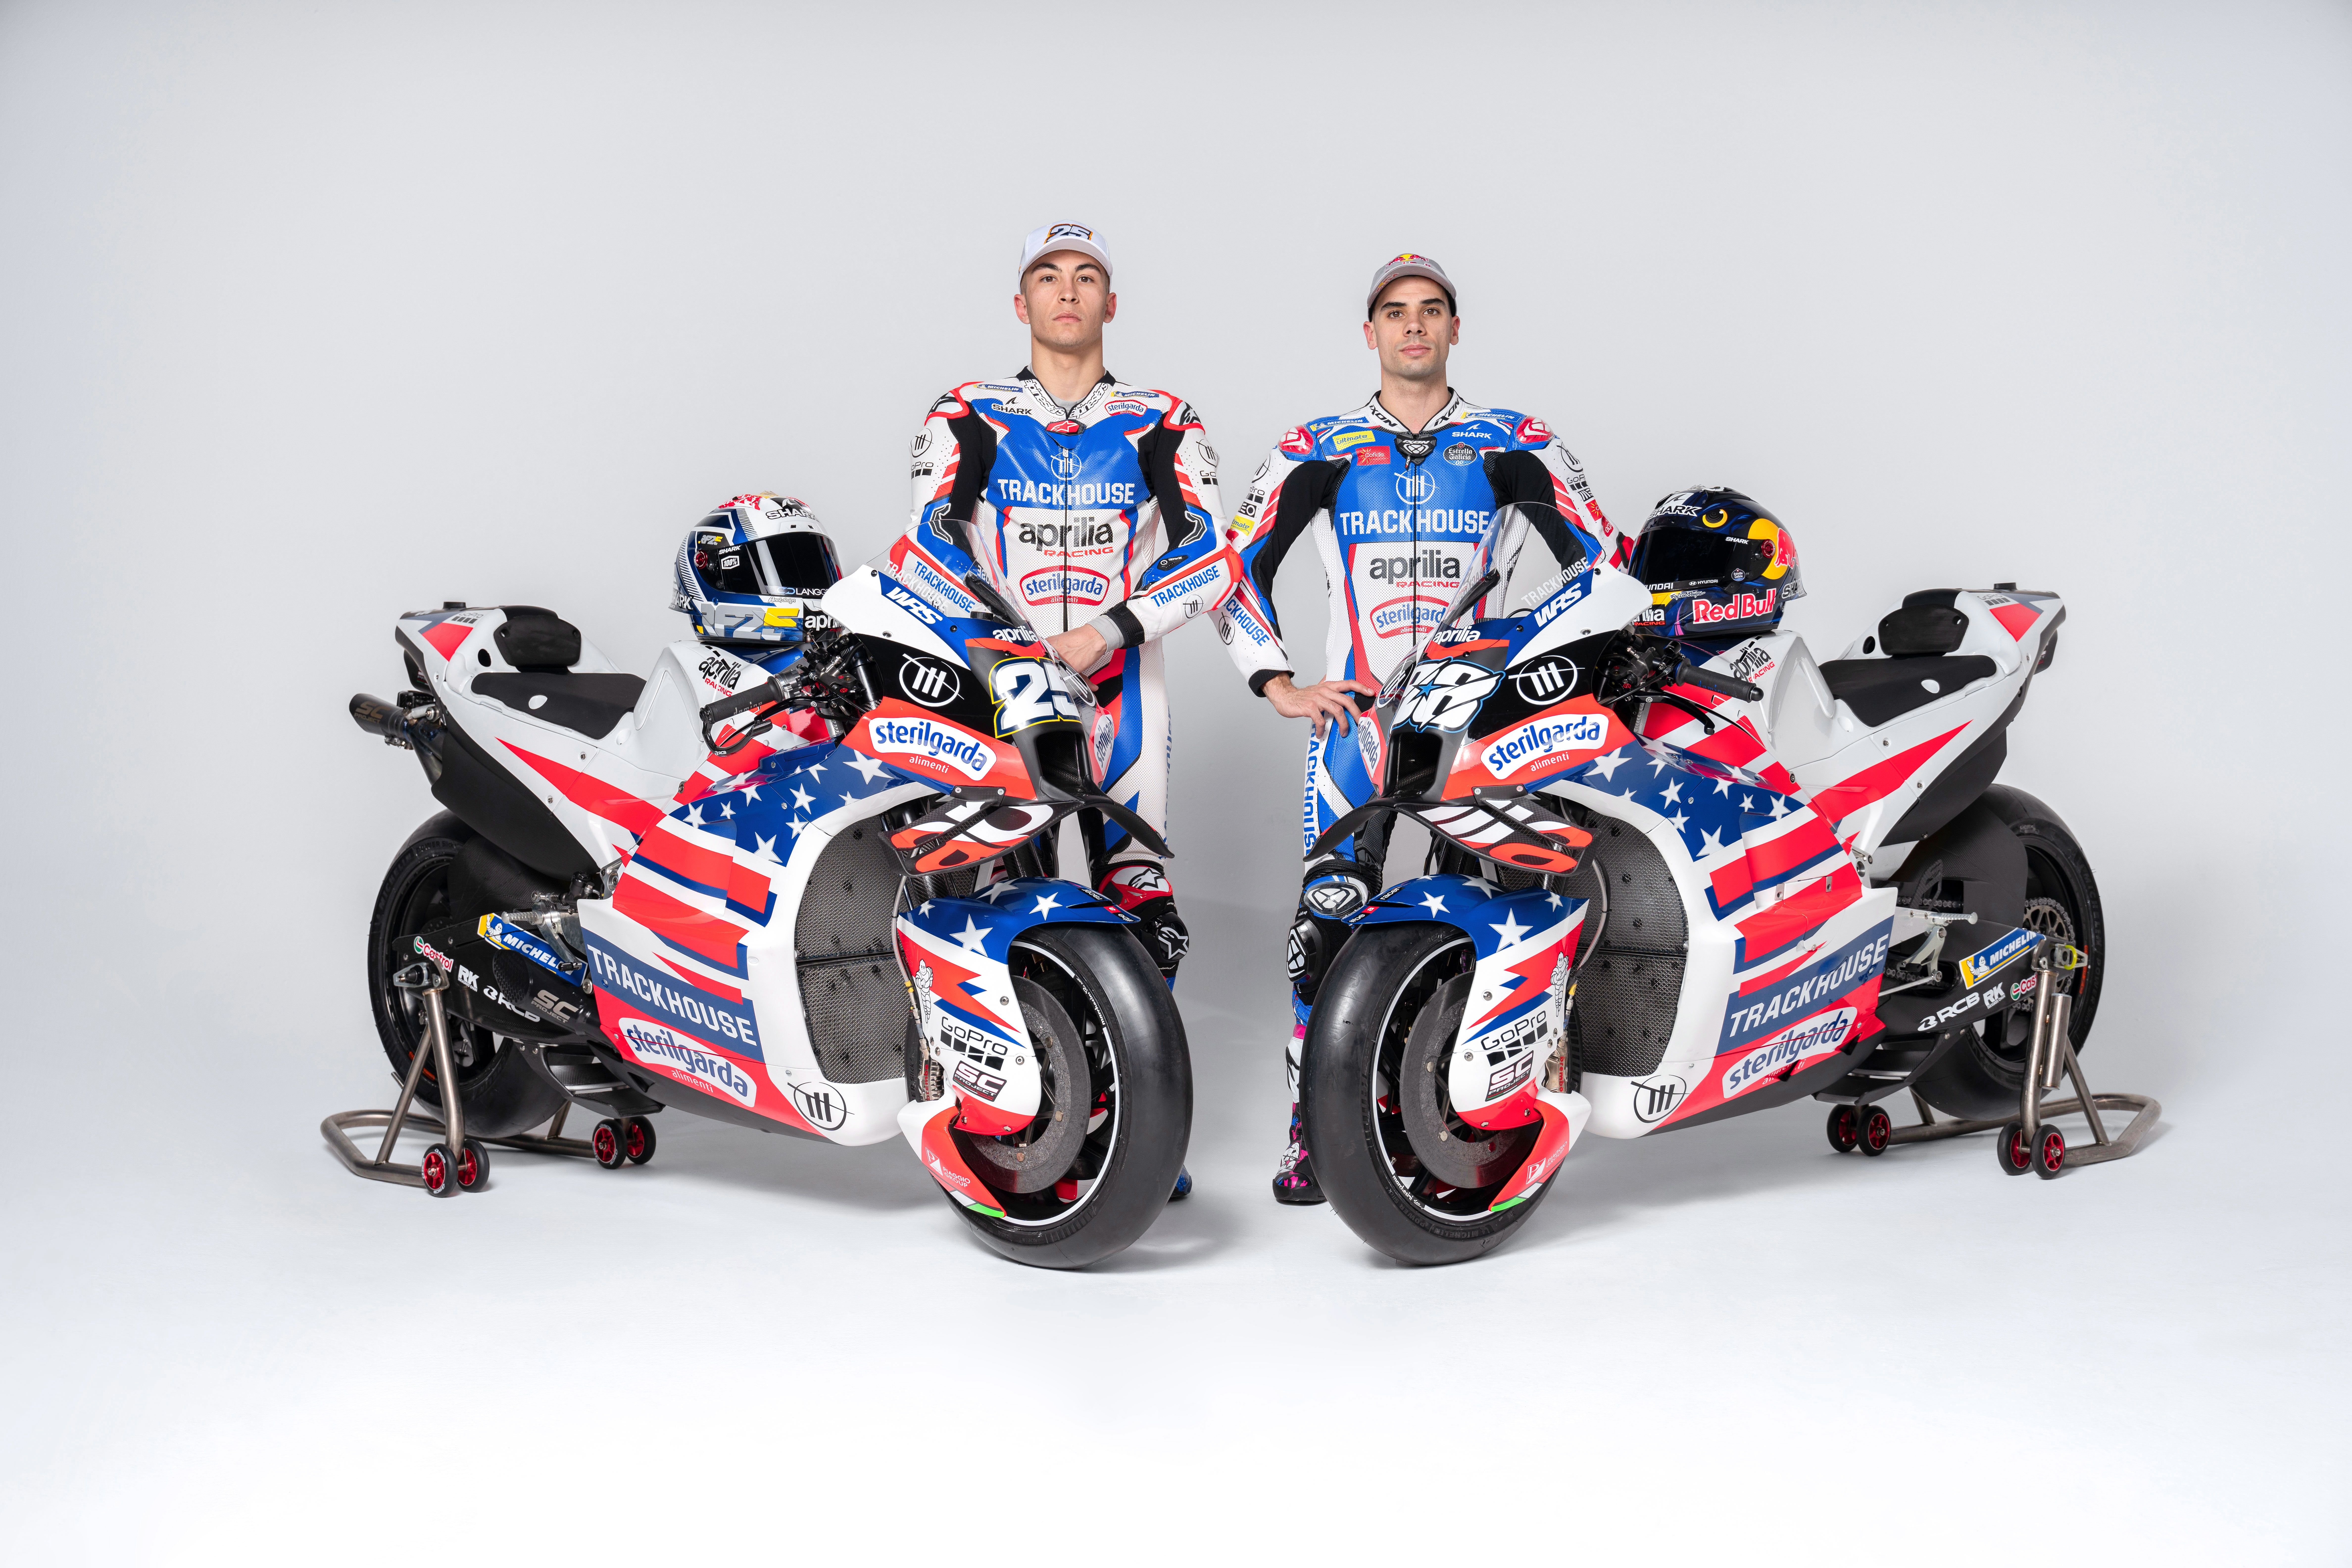 Trackhouse Racing Uses Stars and Stripes Livery for Moto GP Entry